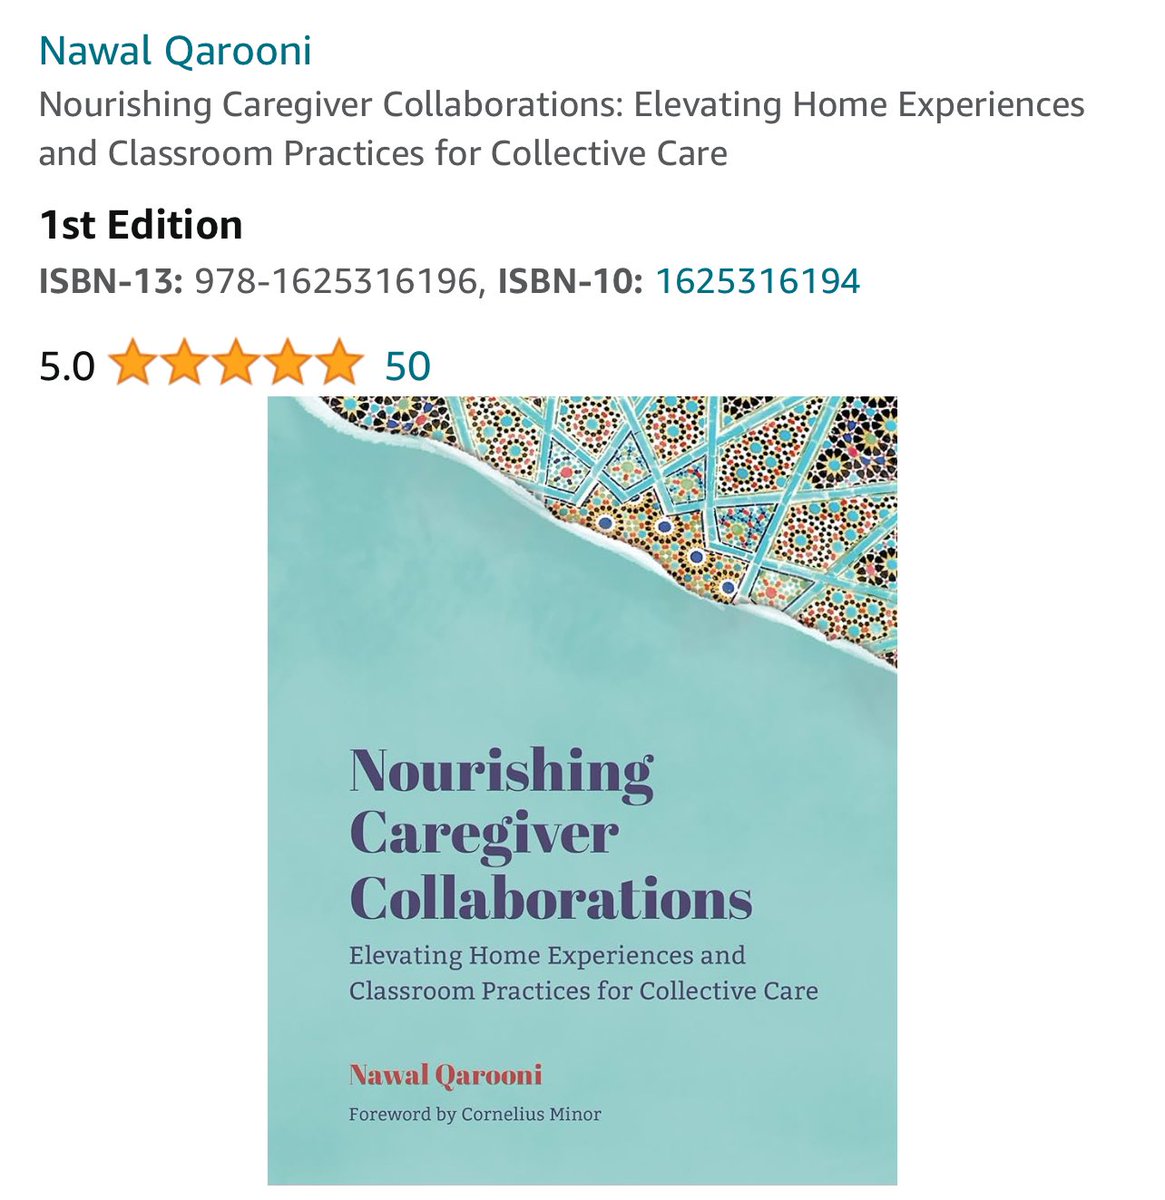 Nourishing Caregiver Collaborations has earned 50 five star reviews! Proud of the work this action research has compelled in schools and communities across the country. 🌟🌟🌟🌟🌟 @stenhousepub @RoutledgeEOE @TerryTreads